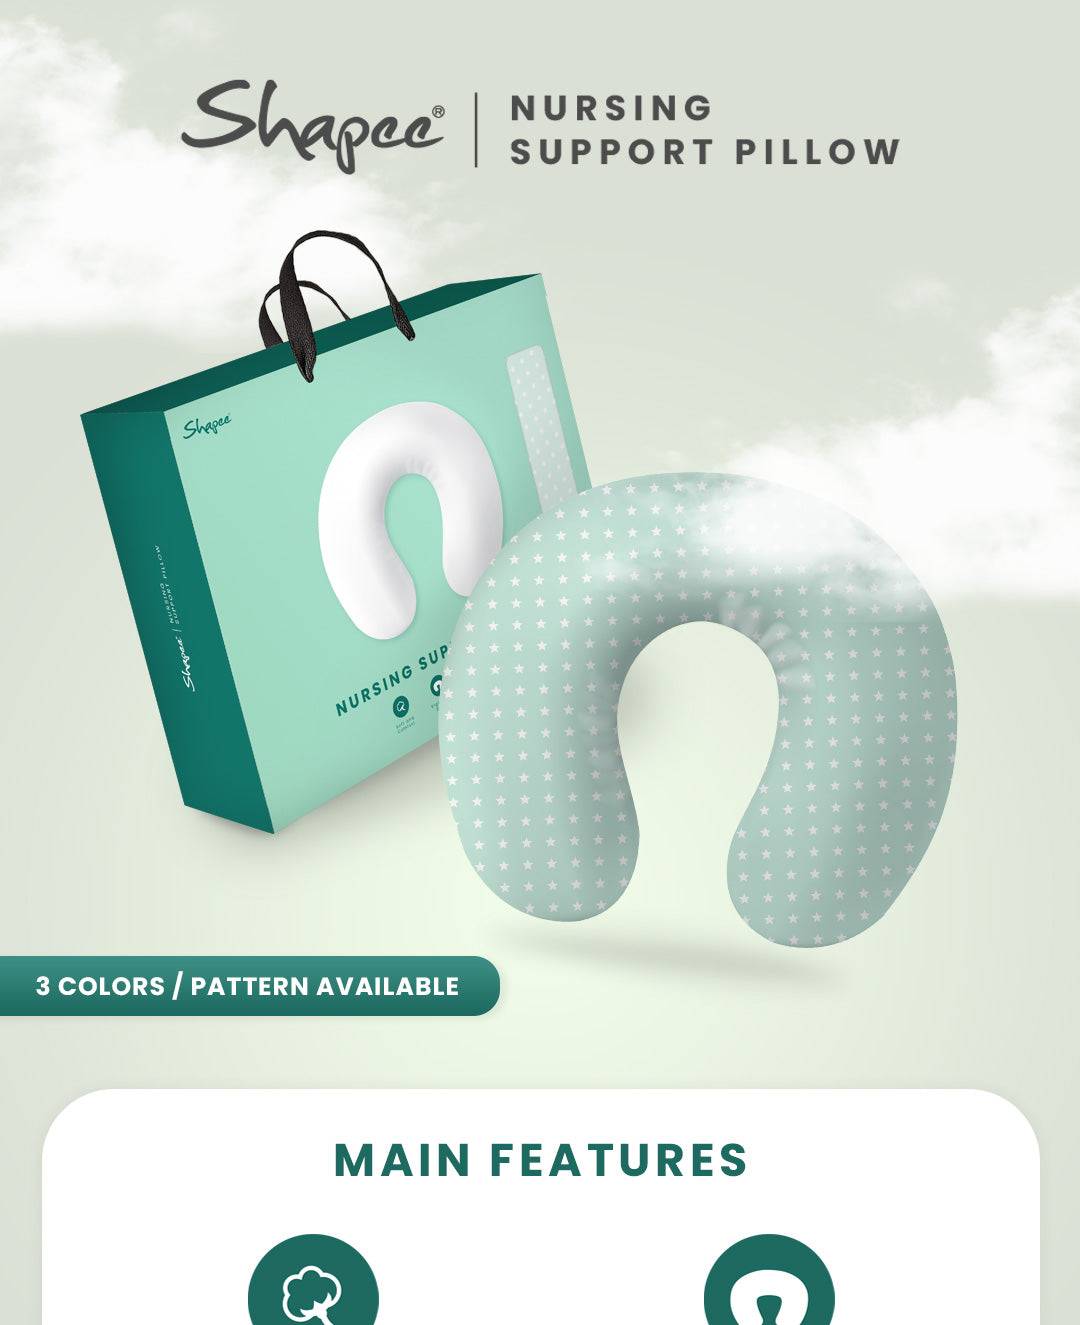 Hypoallergenic Nursing Support Pillow by Shapee for anti-dust and mite resistance1